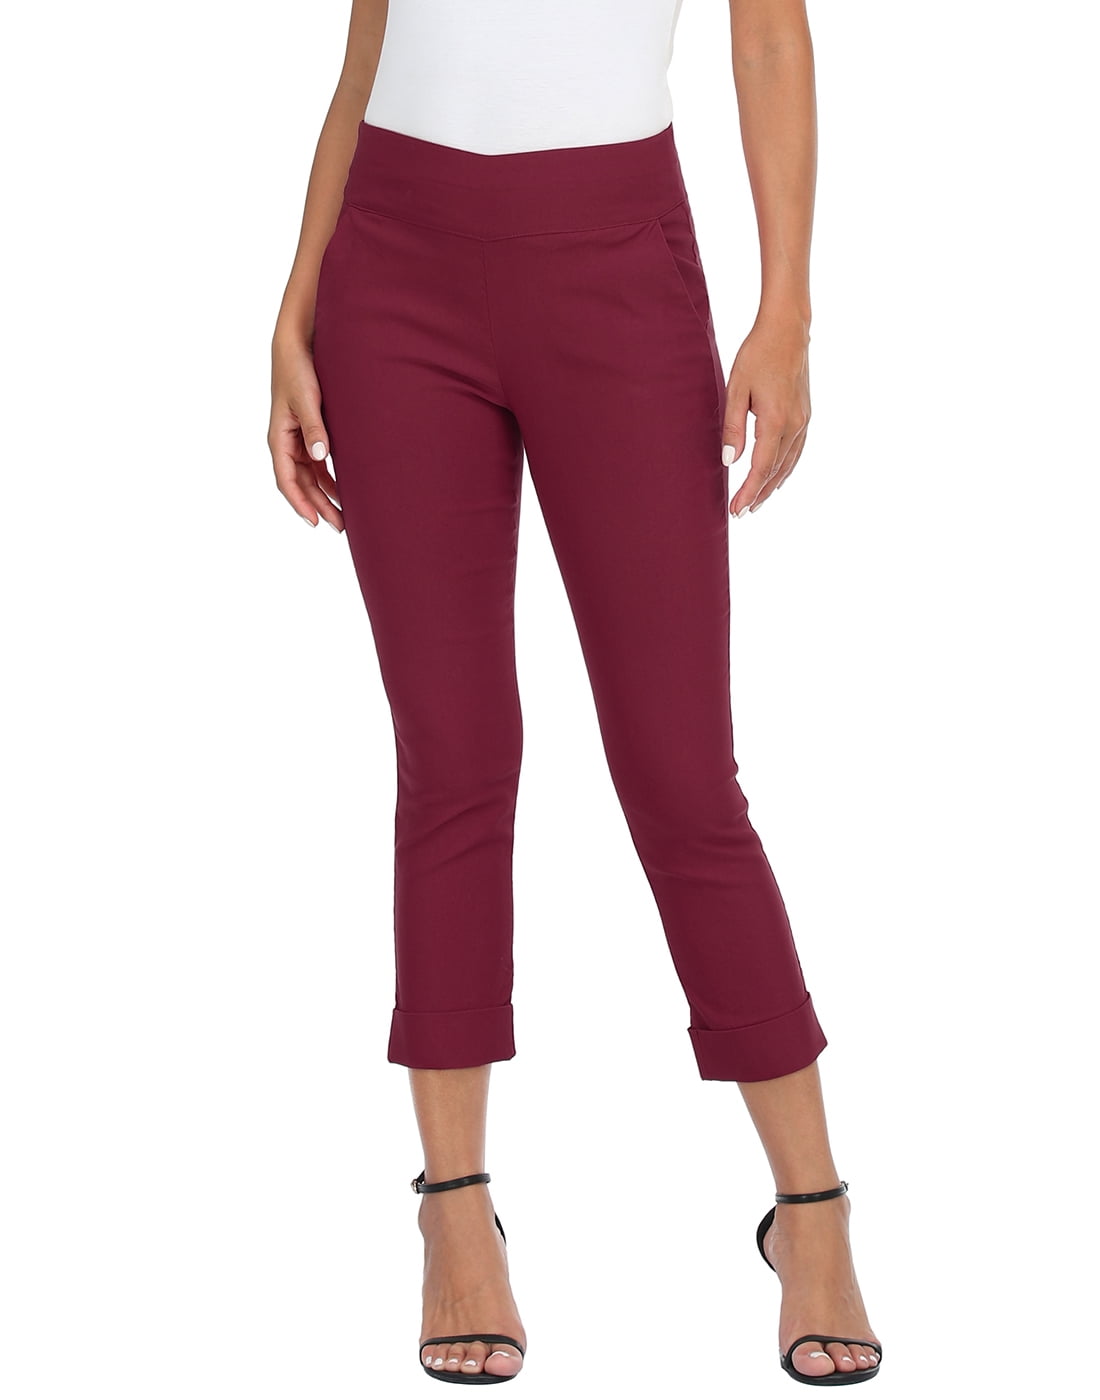 Burgundy pants ☀ Blue jean shirt | Burgundy pants outfit, Cool outfits,  Casual work outfits